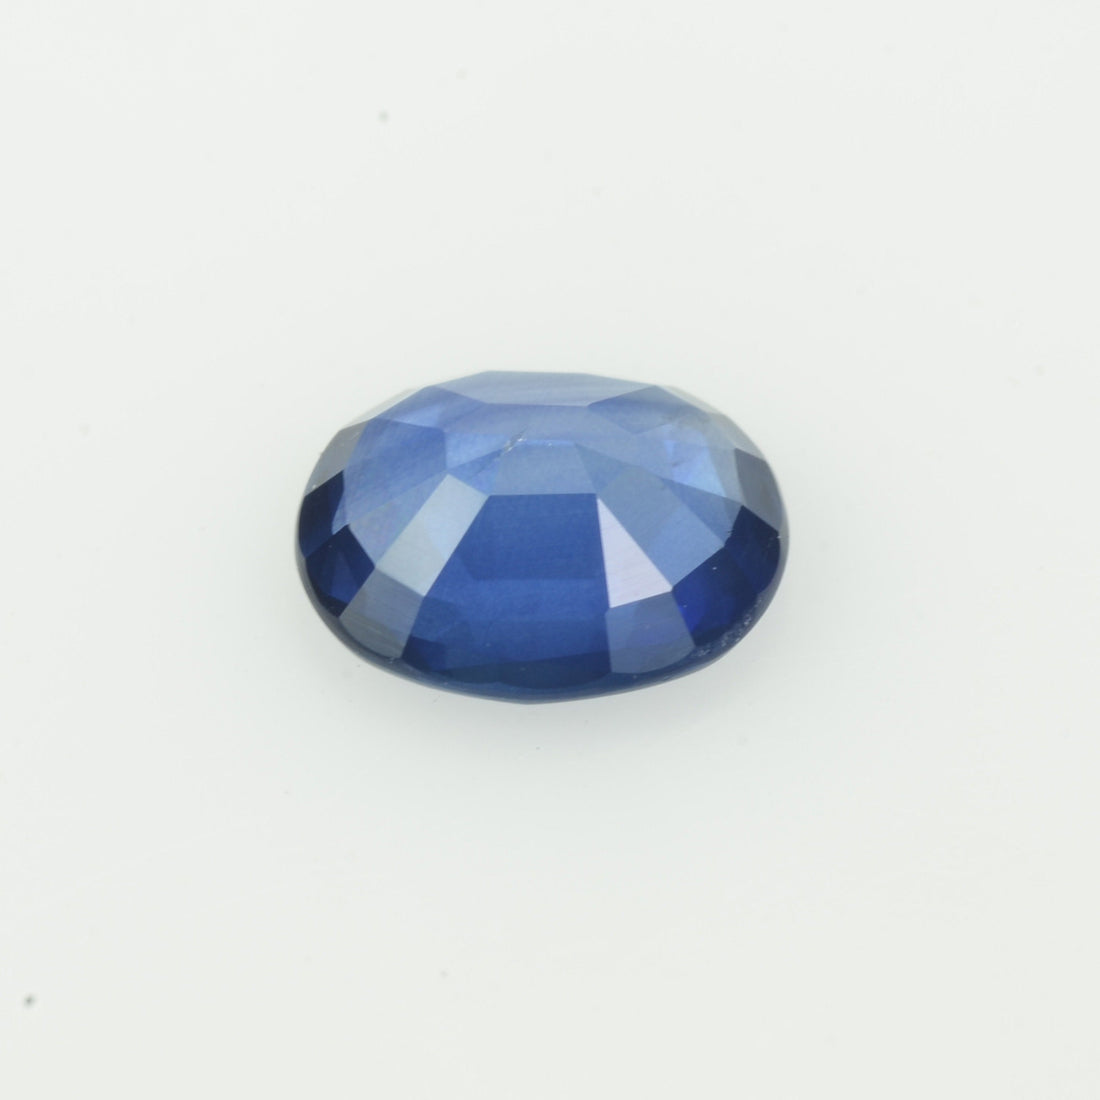 0.69 cts Natural Blue Sapphire Loose Gemstone Oval Cut